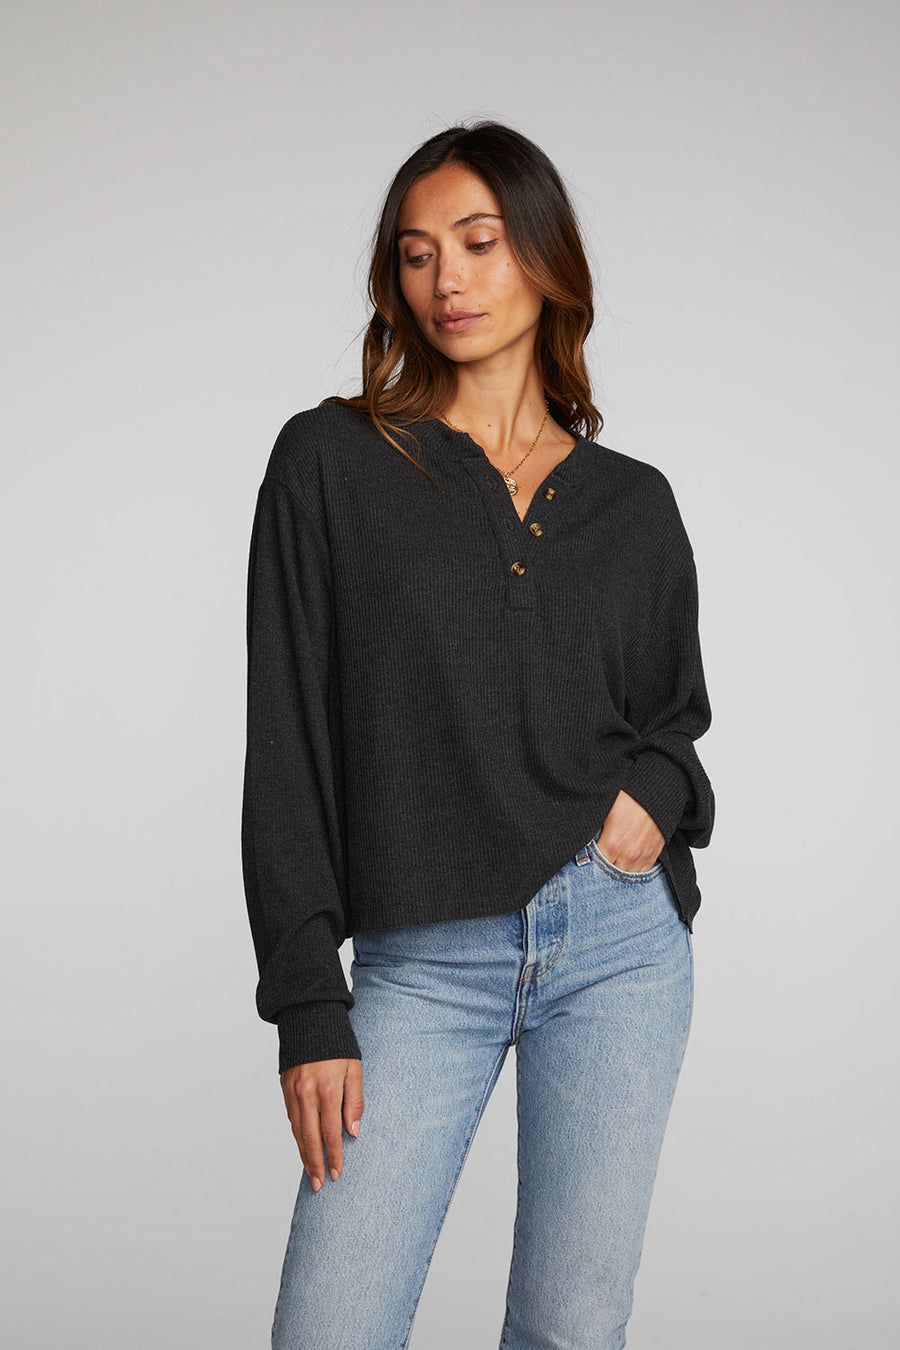 Recycled Love Rib Long Sleeve Henley with Deconstructed Hem Womens chaserbrand